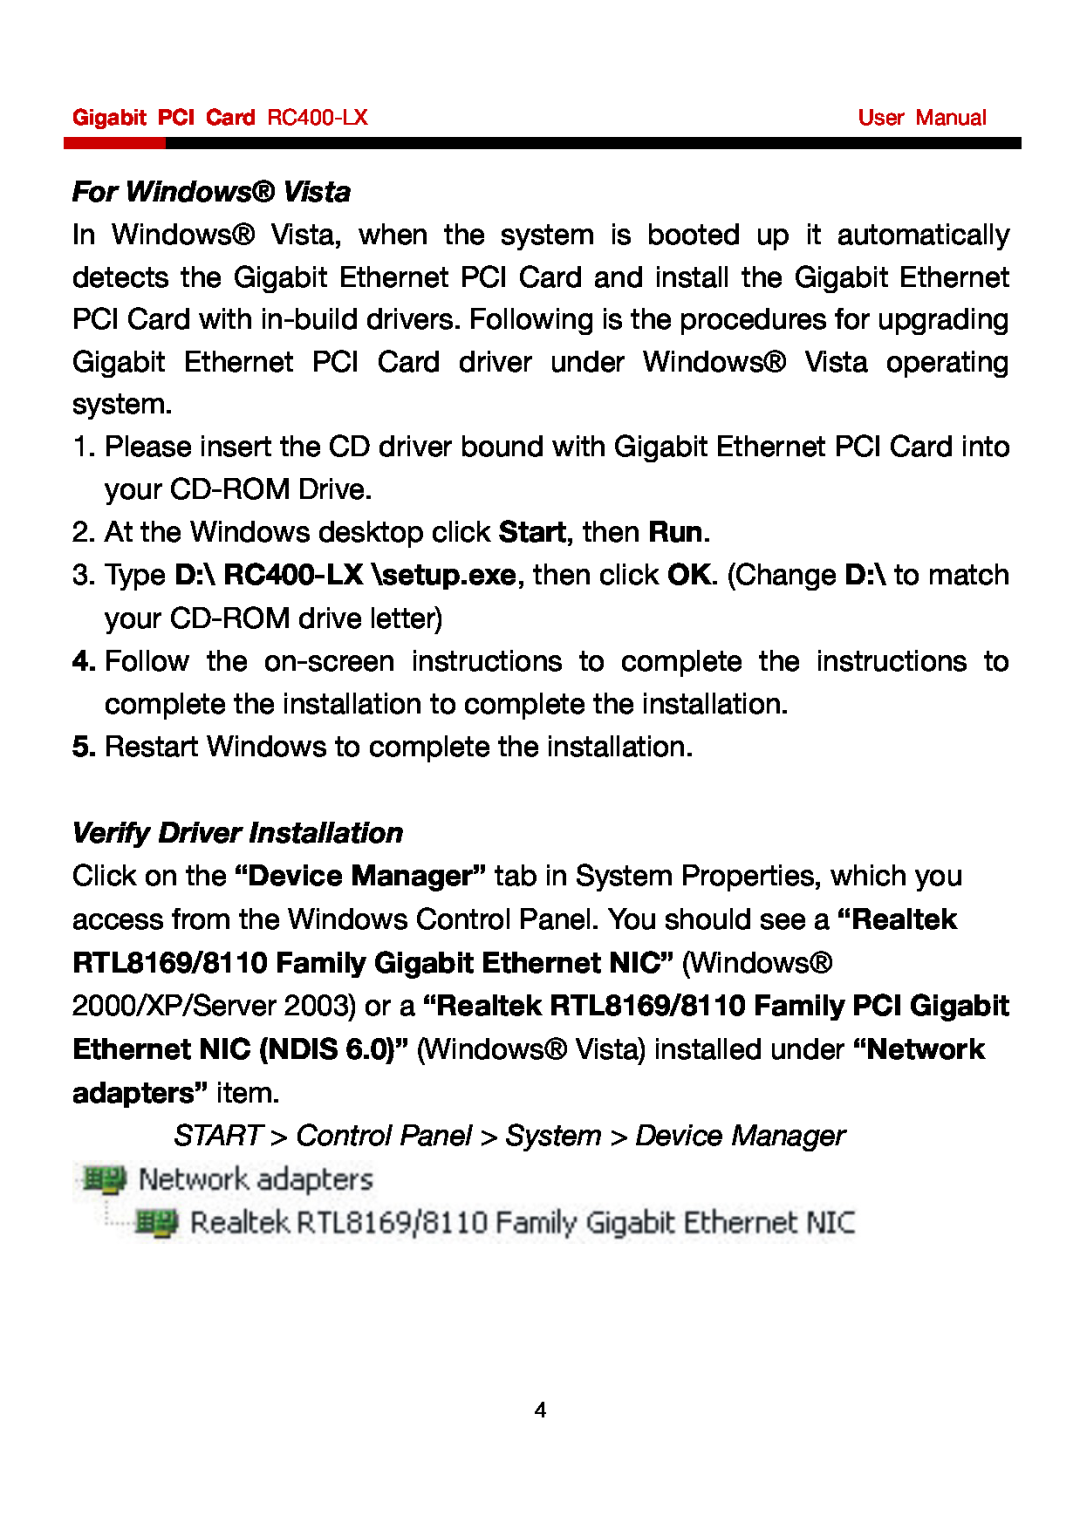 Rosewill RC-400 user manual For Windows Vista, Verify Driver Installation, START Control Panel System Device Manager 